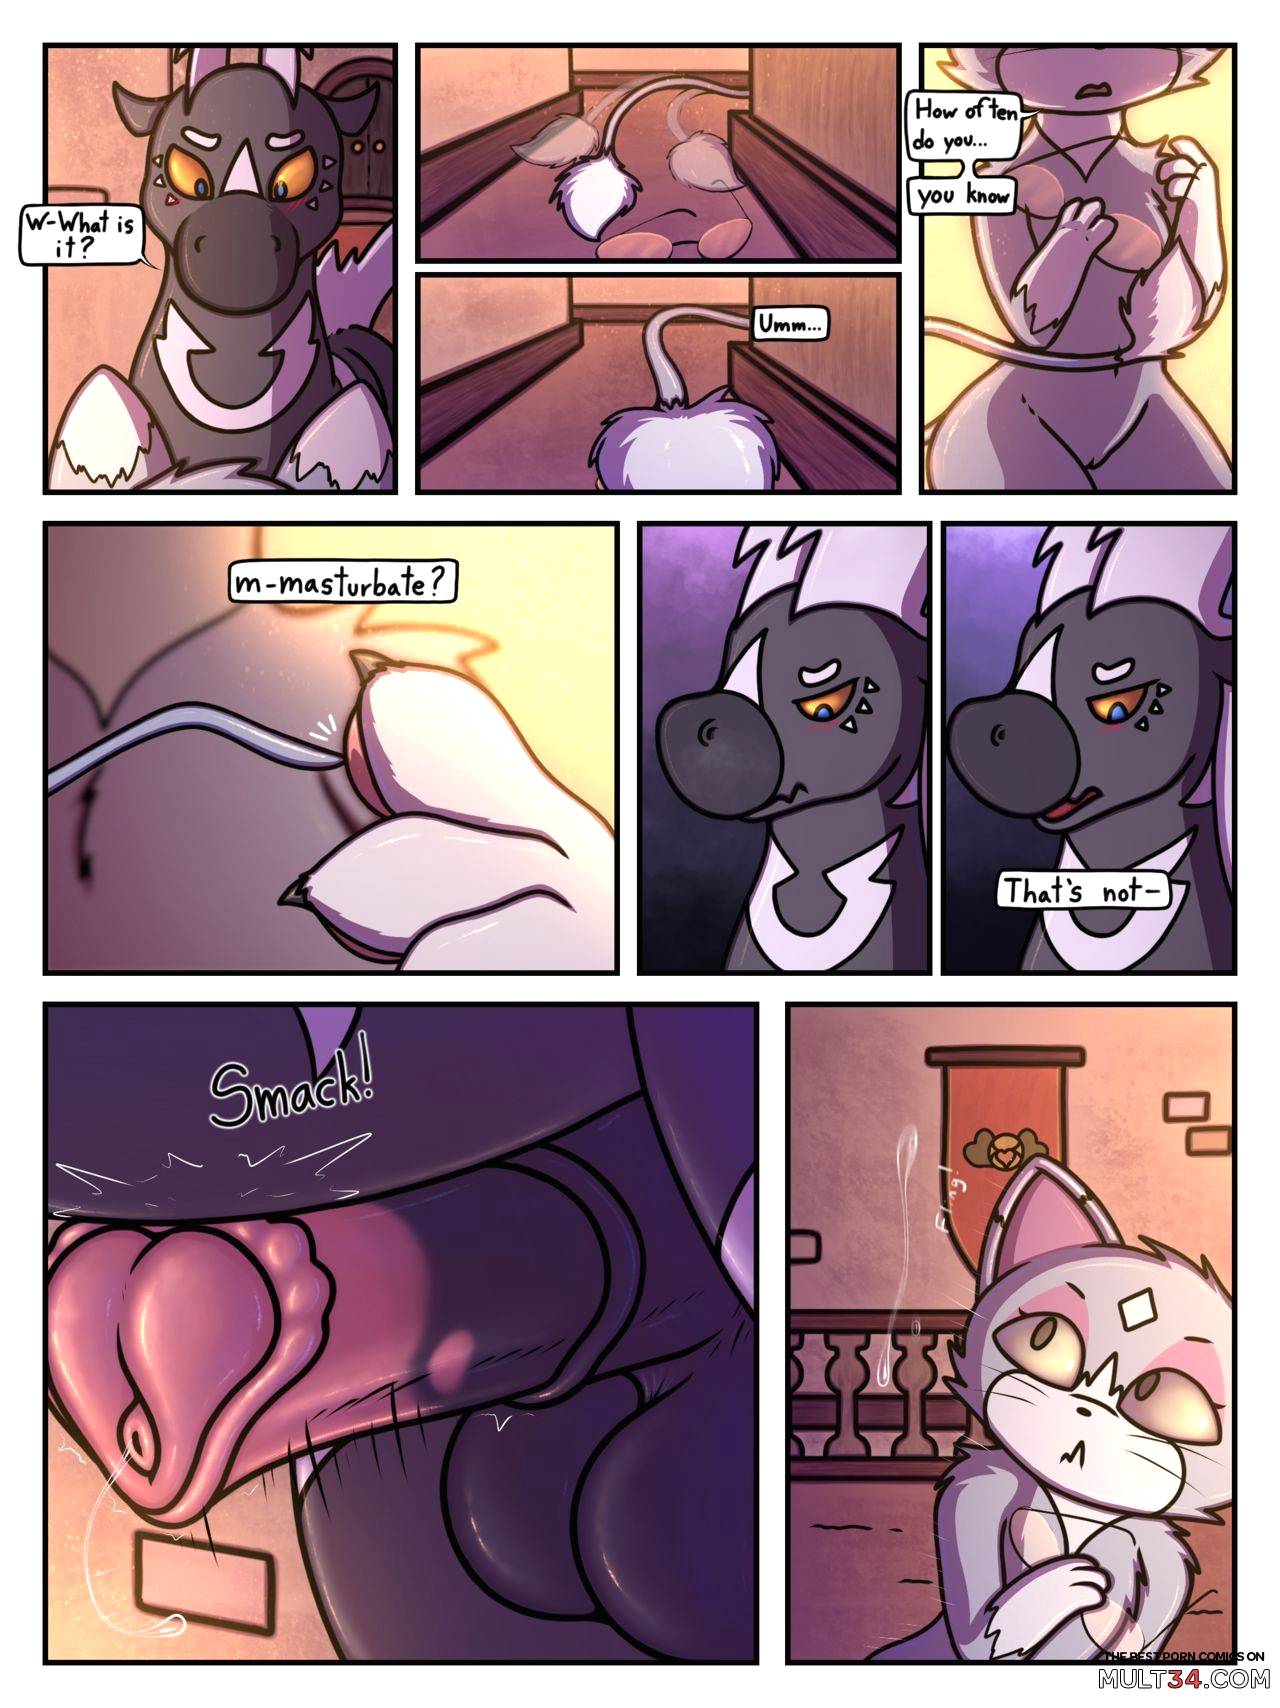 Wanderlust chapter 1 page 20